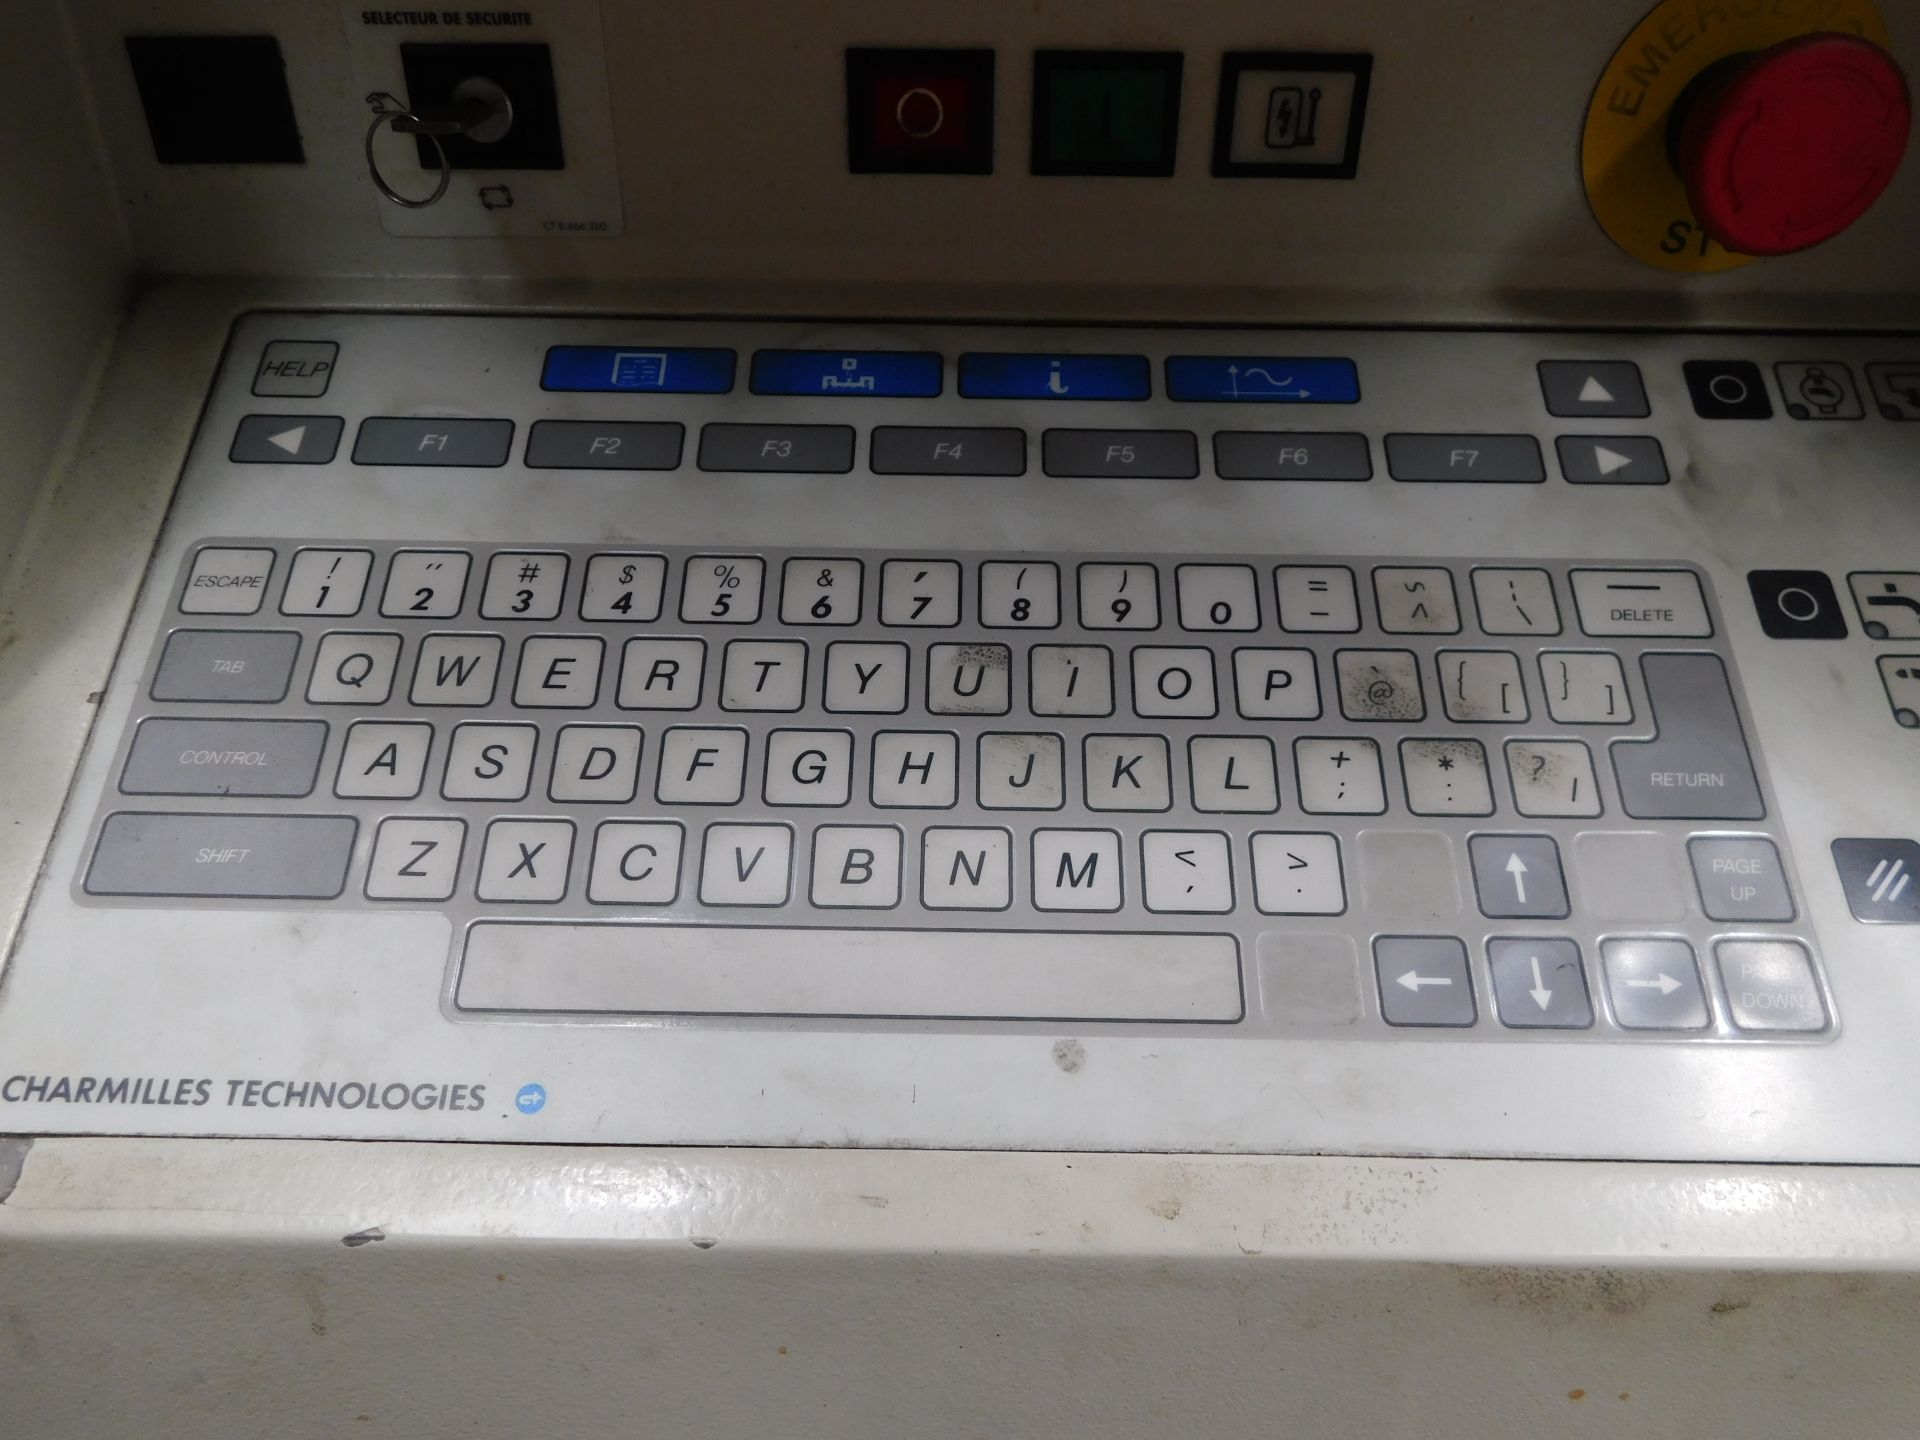 Charmilles Roboform 30 CNC Spark Eroding Machine, Serial Number 5.5492-62075 (1996)  (Located - Image 15 of 19